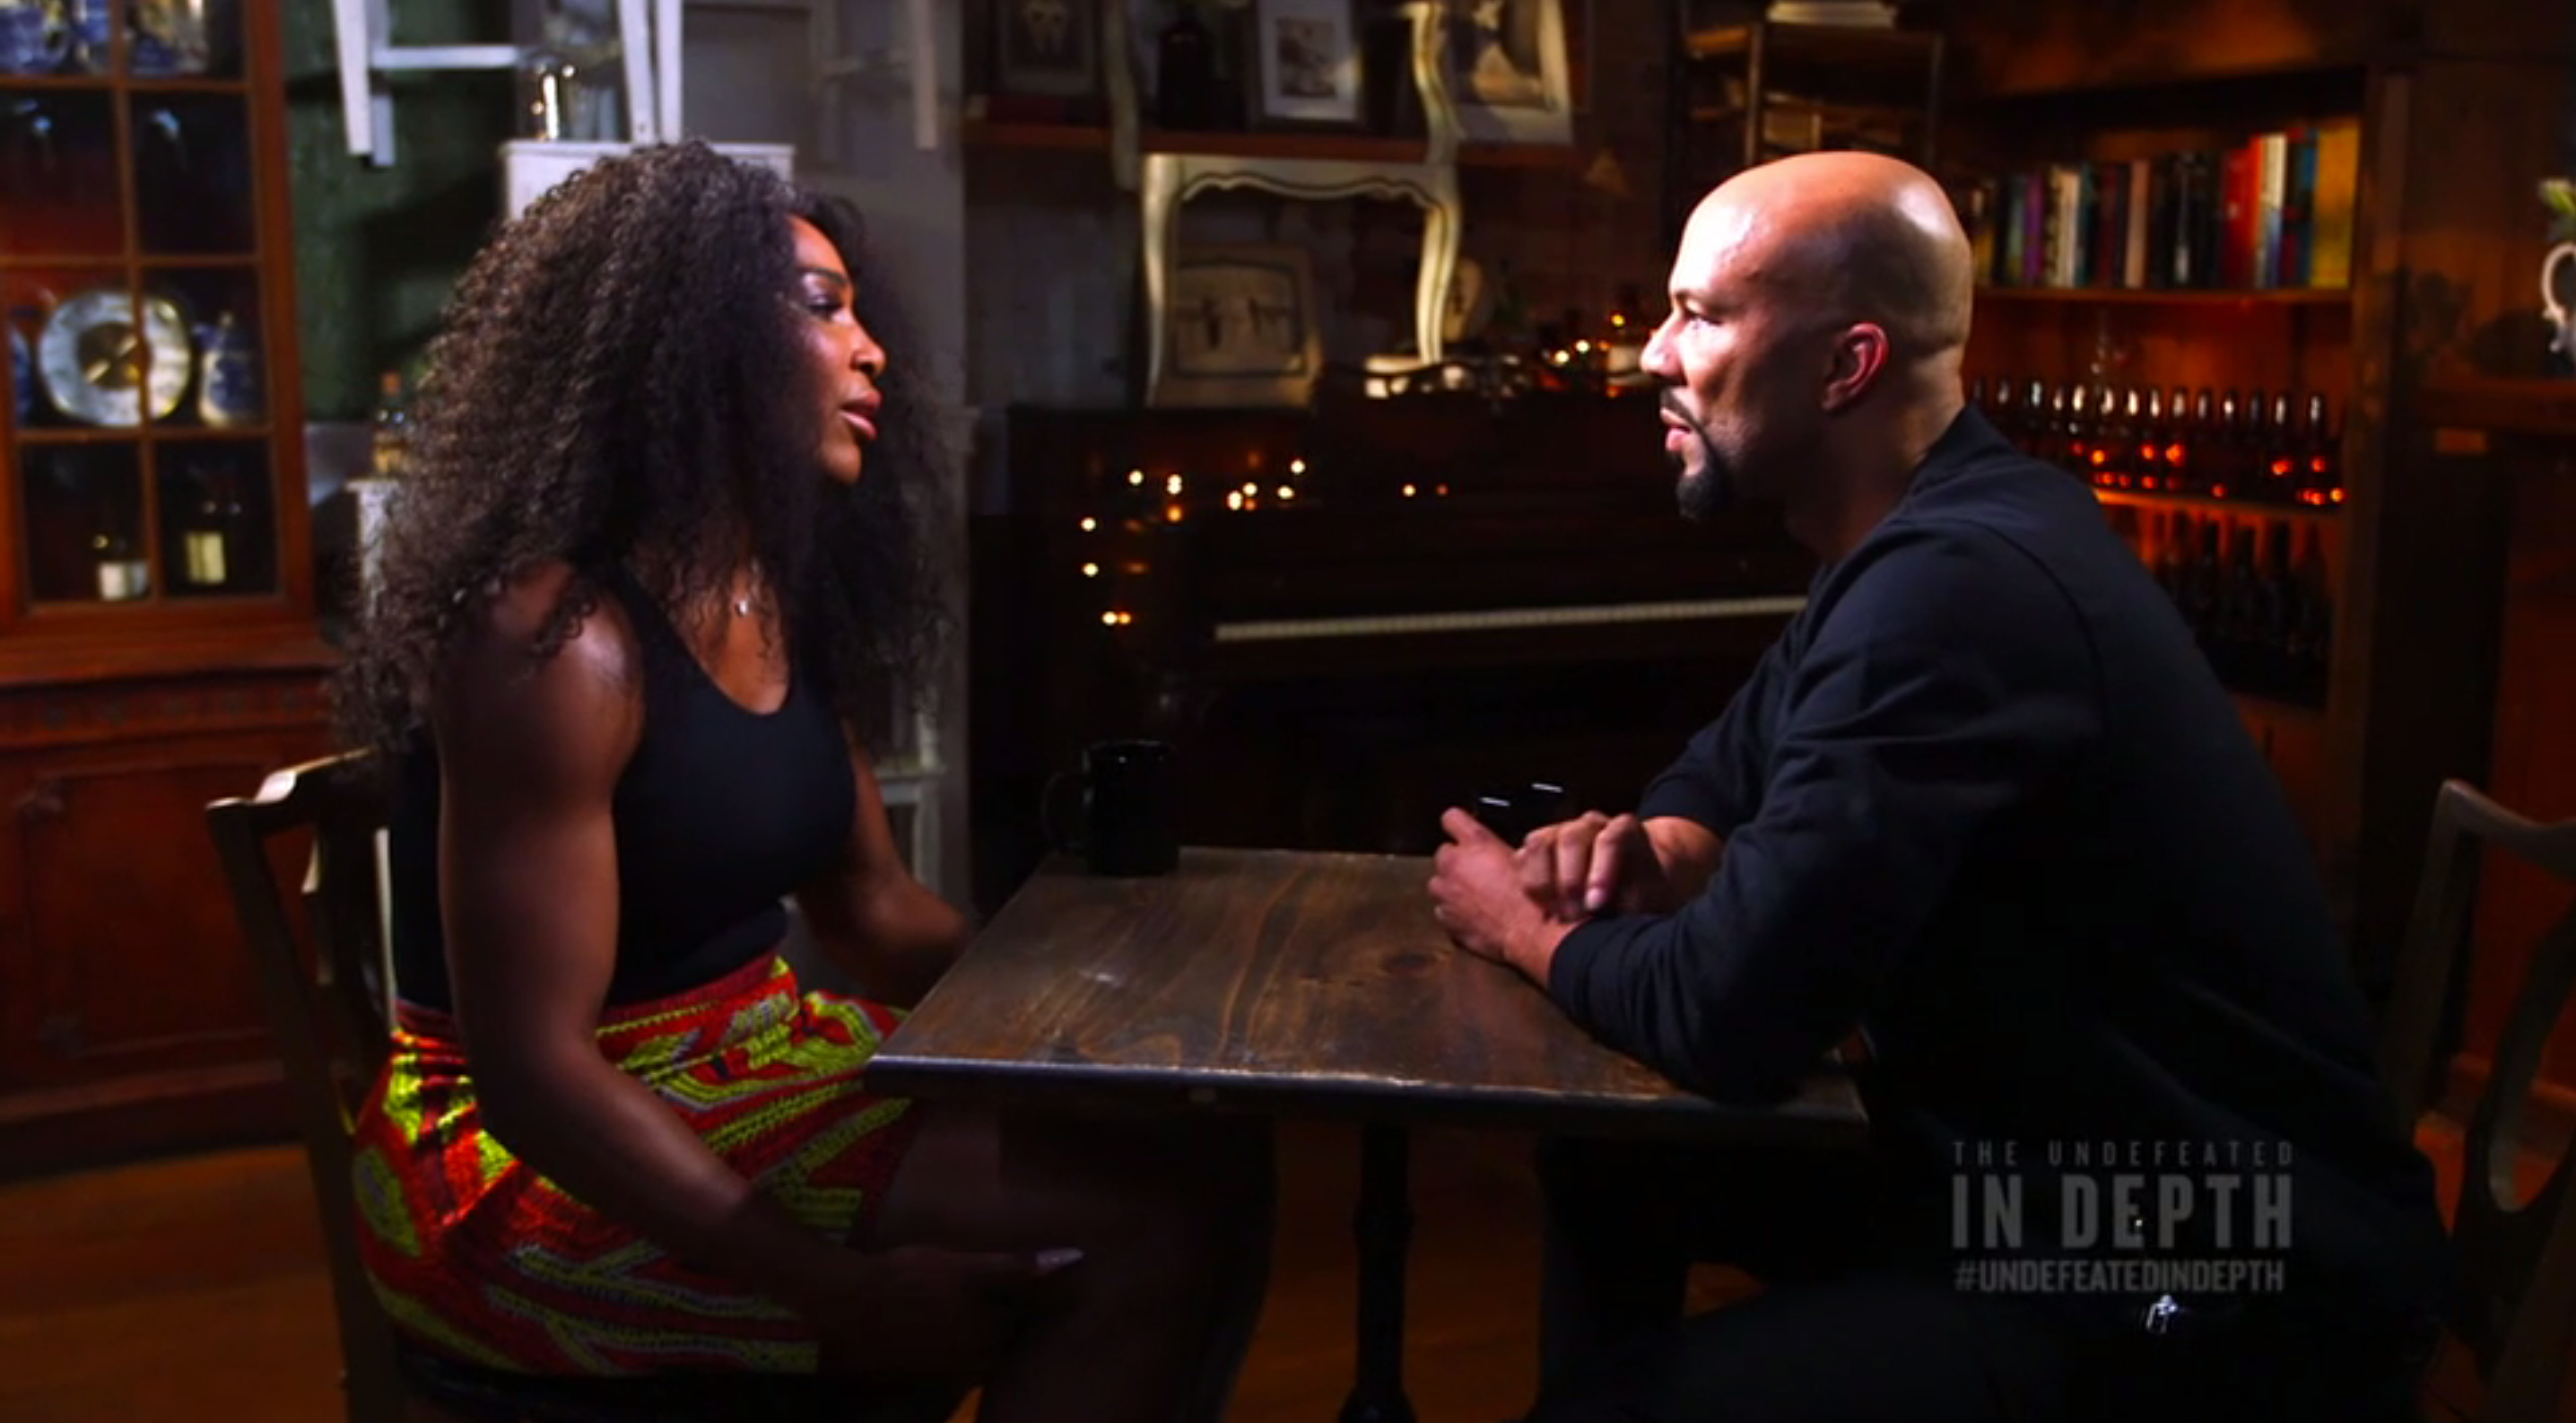 Serena Williams In Depth Body Confidence Interview With Common For The Undefeated ...2872 x 1586